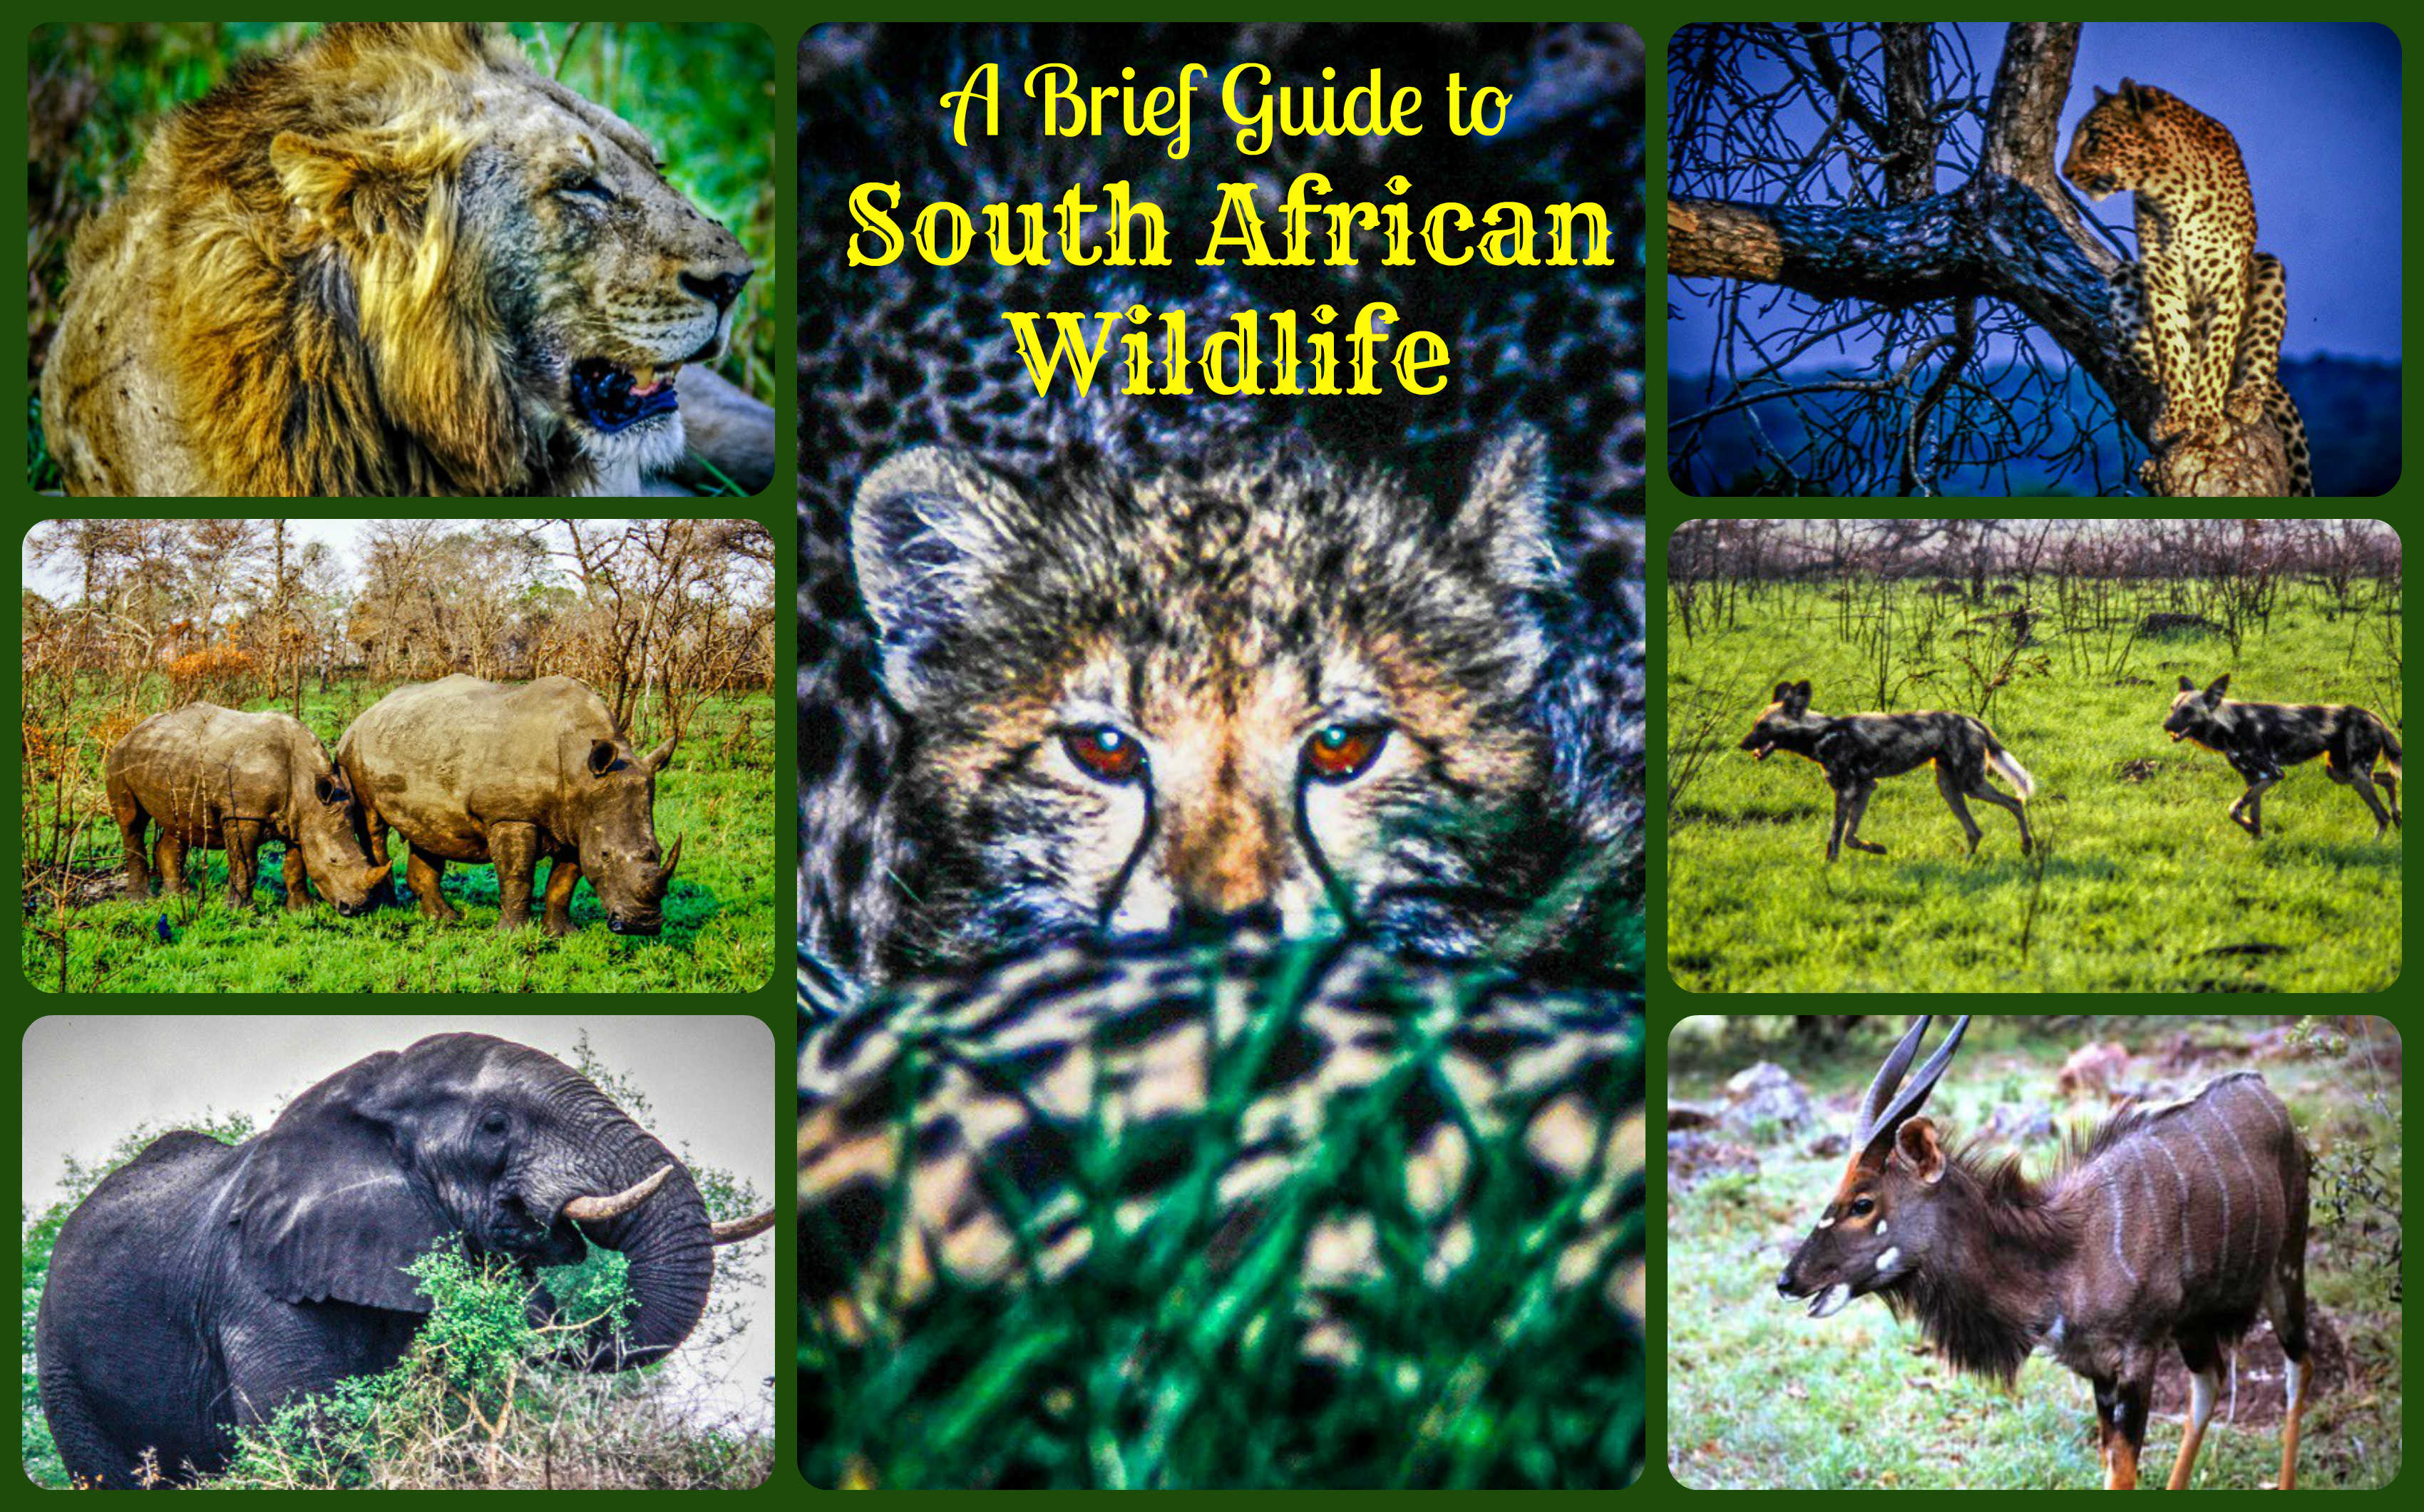 A-Brief-Guide-to-South-African-Wildlife.jpg